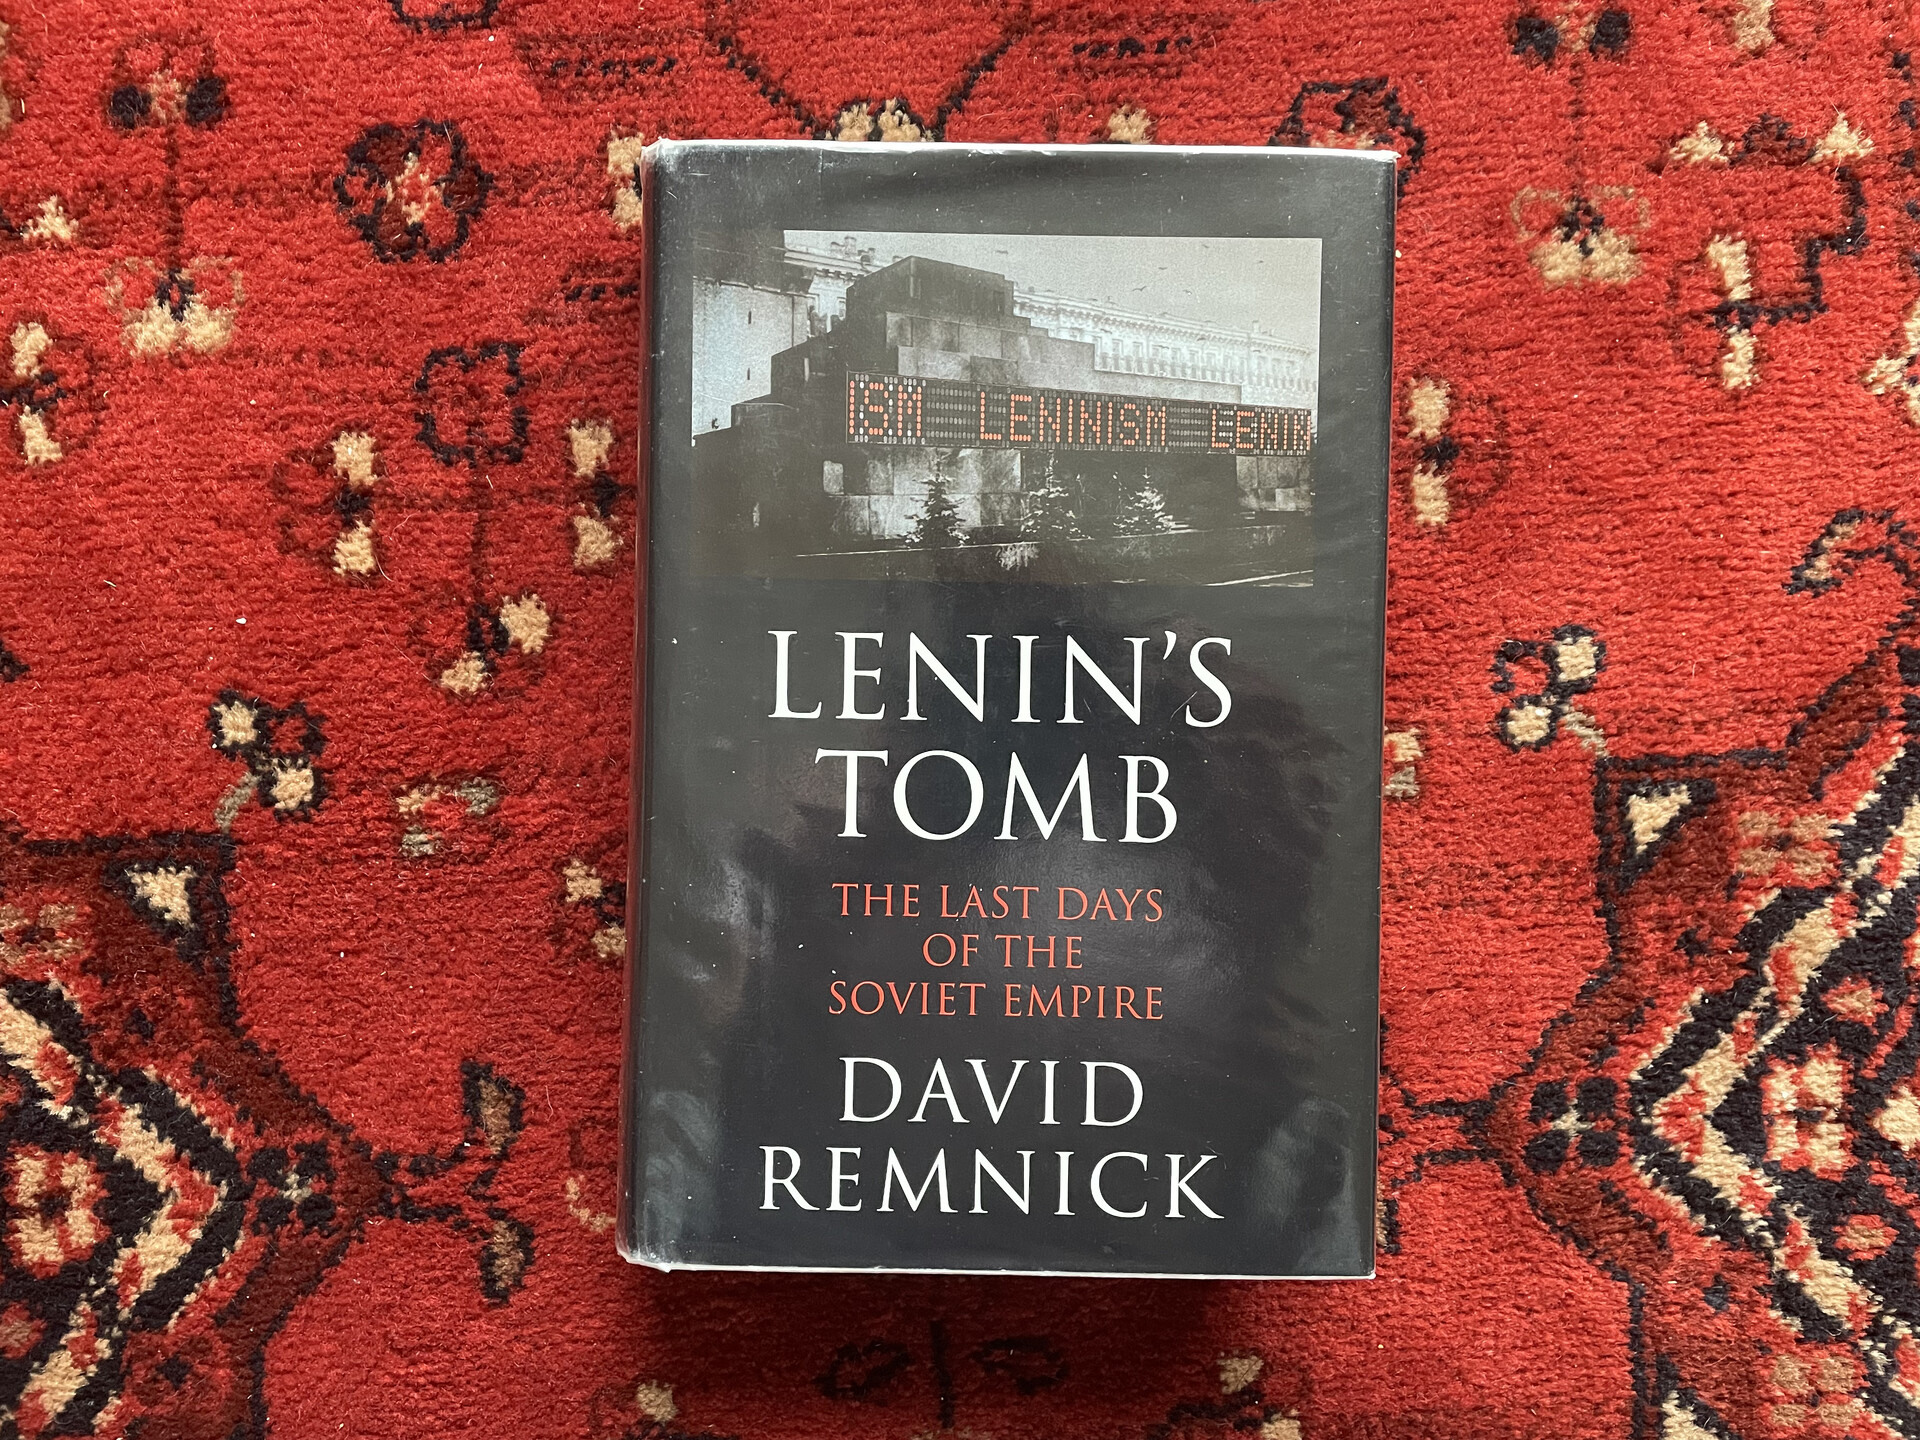 Lenin's Tomb: The Last Days of the Soviet Empire by David Remnick